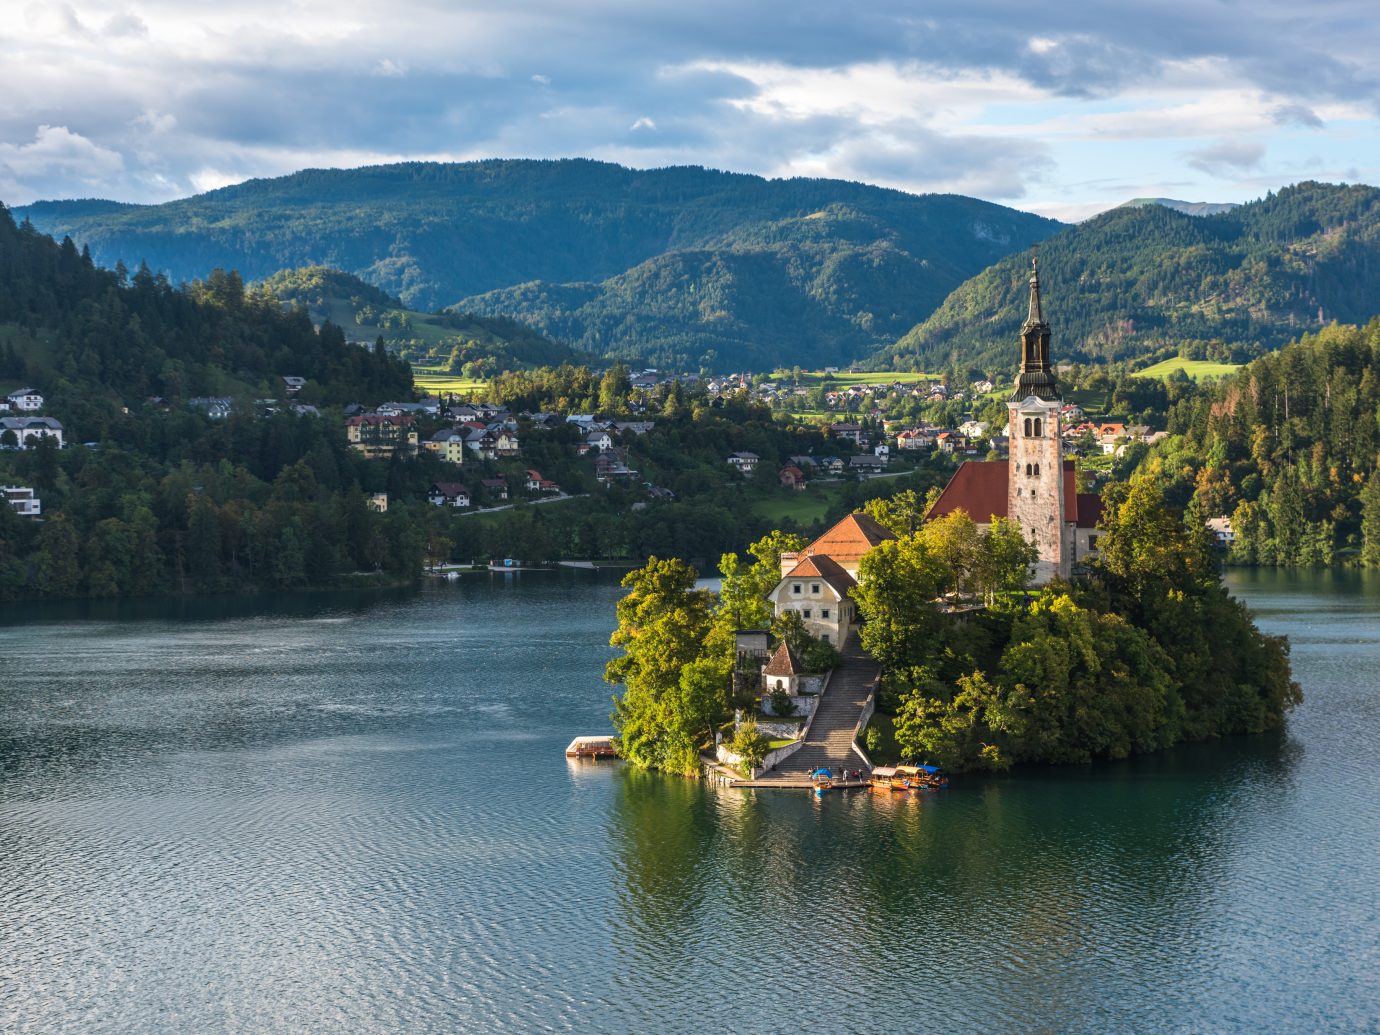 Bled Lake, Slovenia, with the Assumption of Mary Church in the island